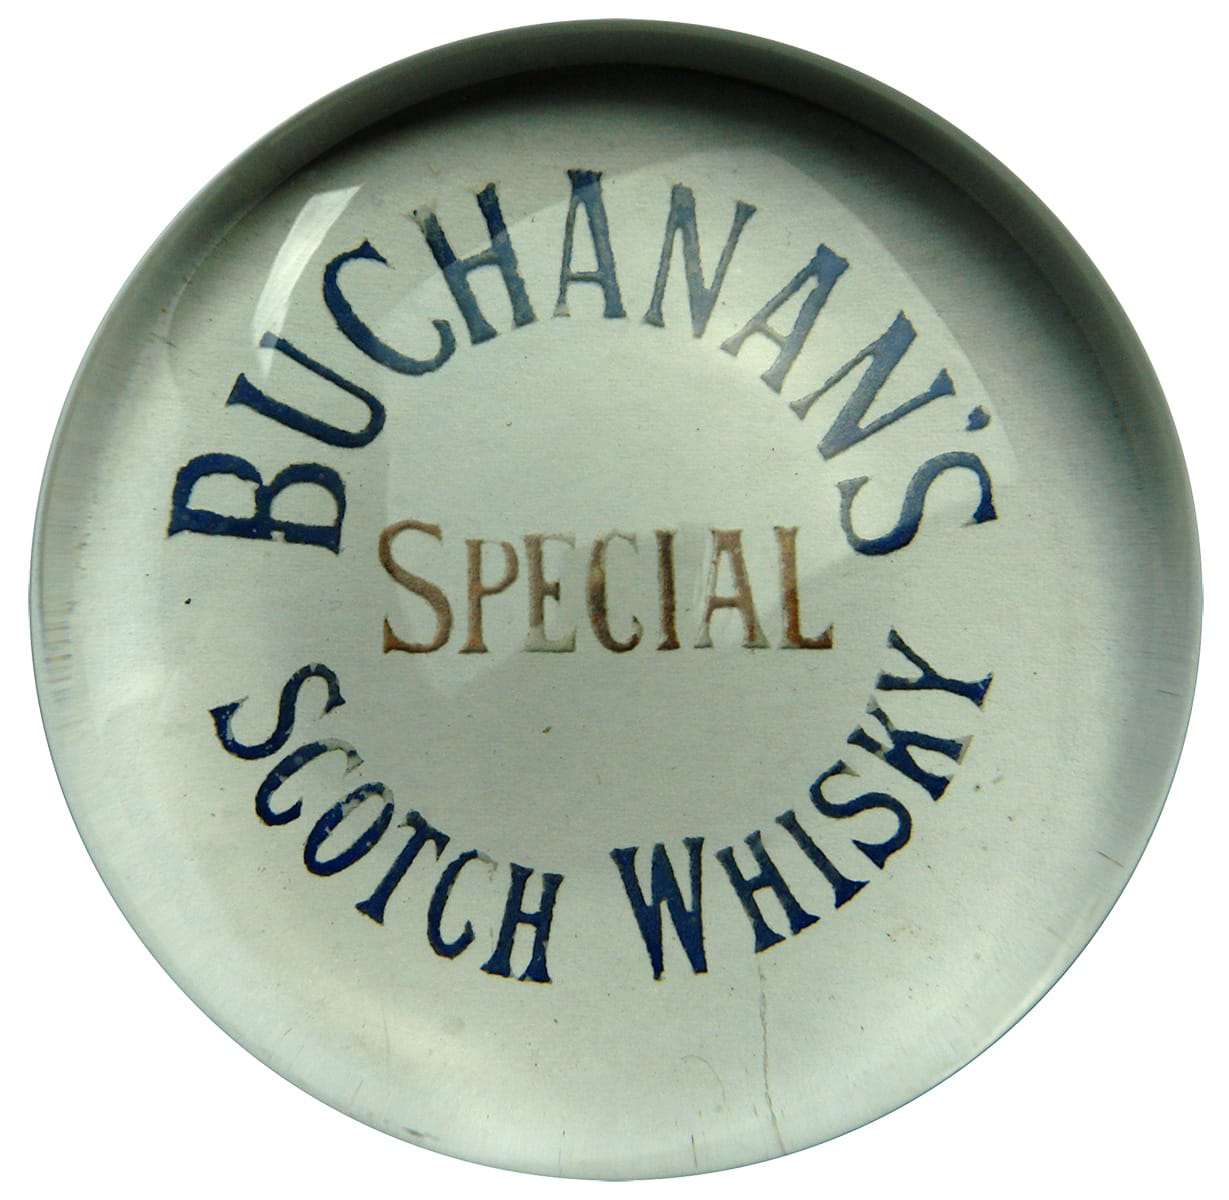 Buchanan's Special Scotch Whisky Paperweight